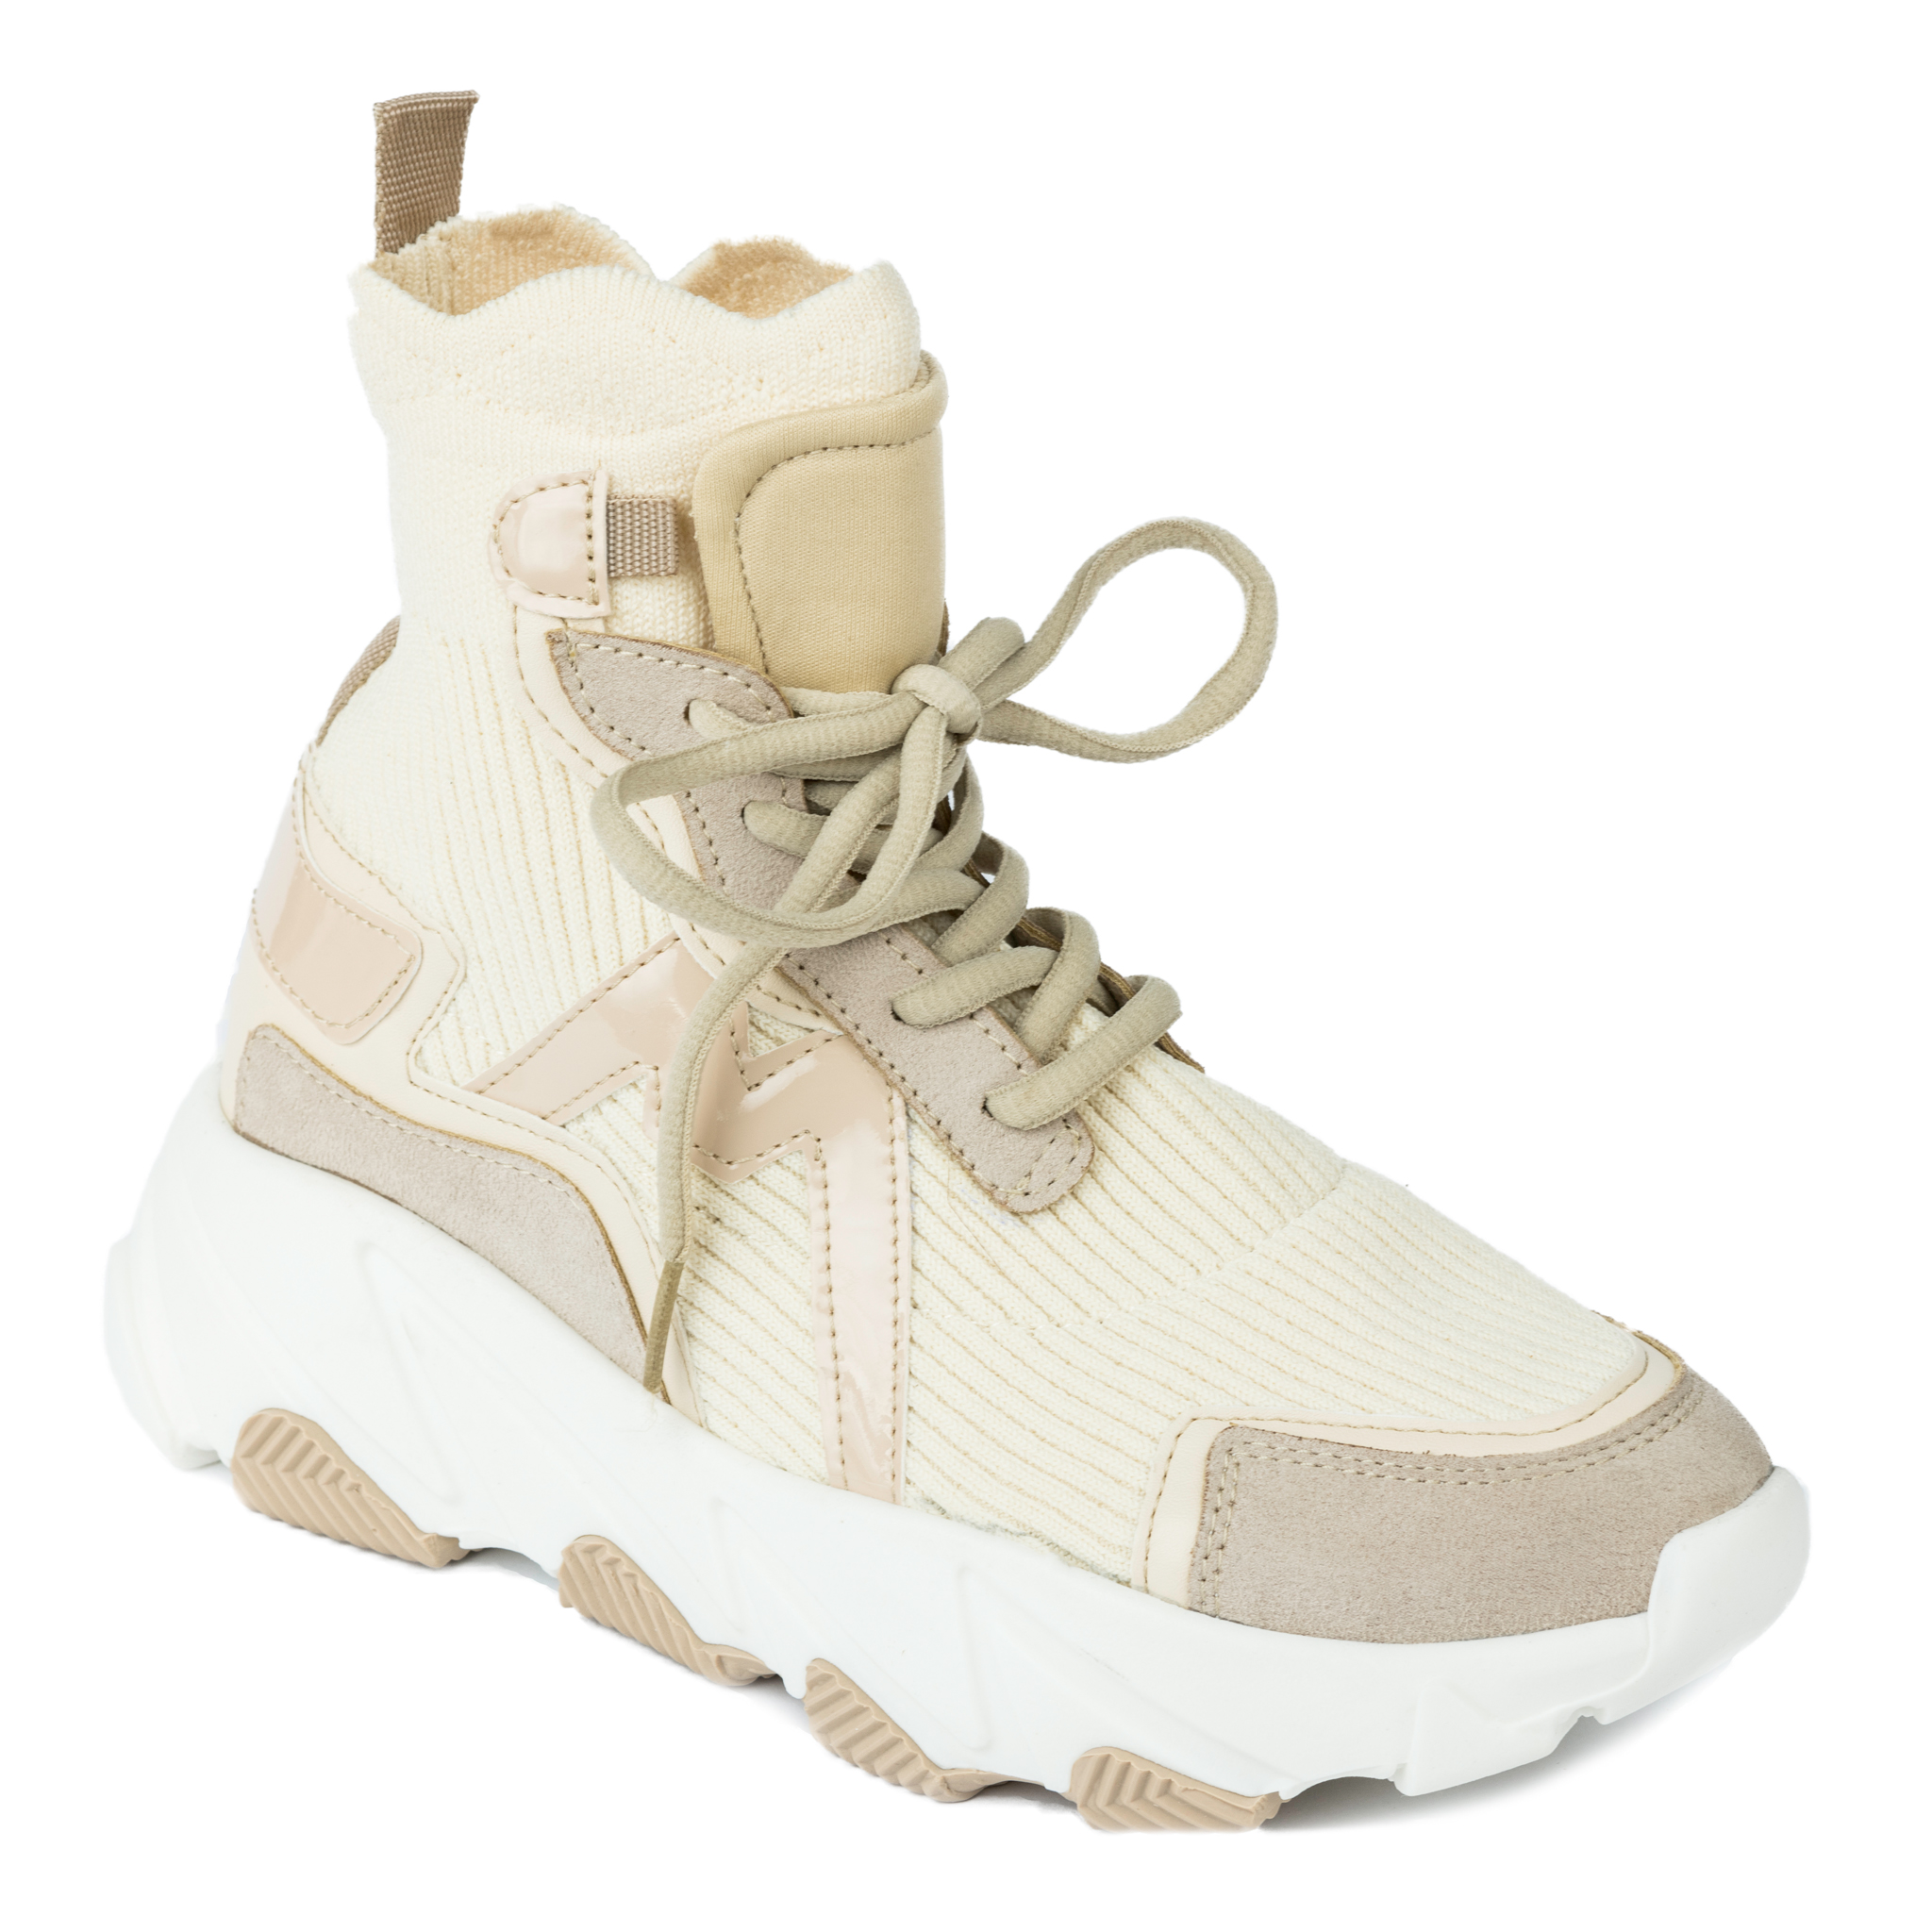 HIGH SOLE ANKLE STRETCH SNEAKERS - BEIGE